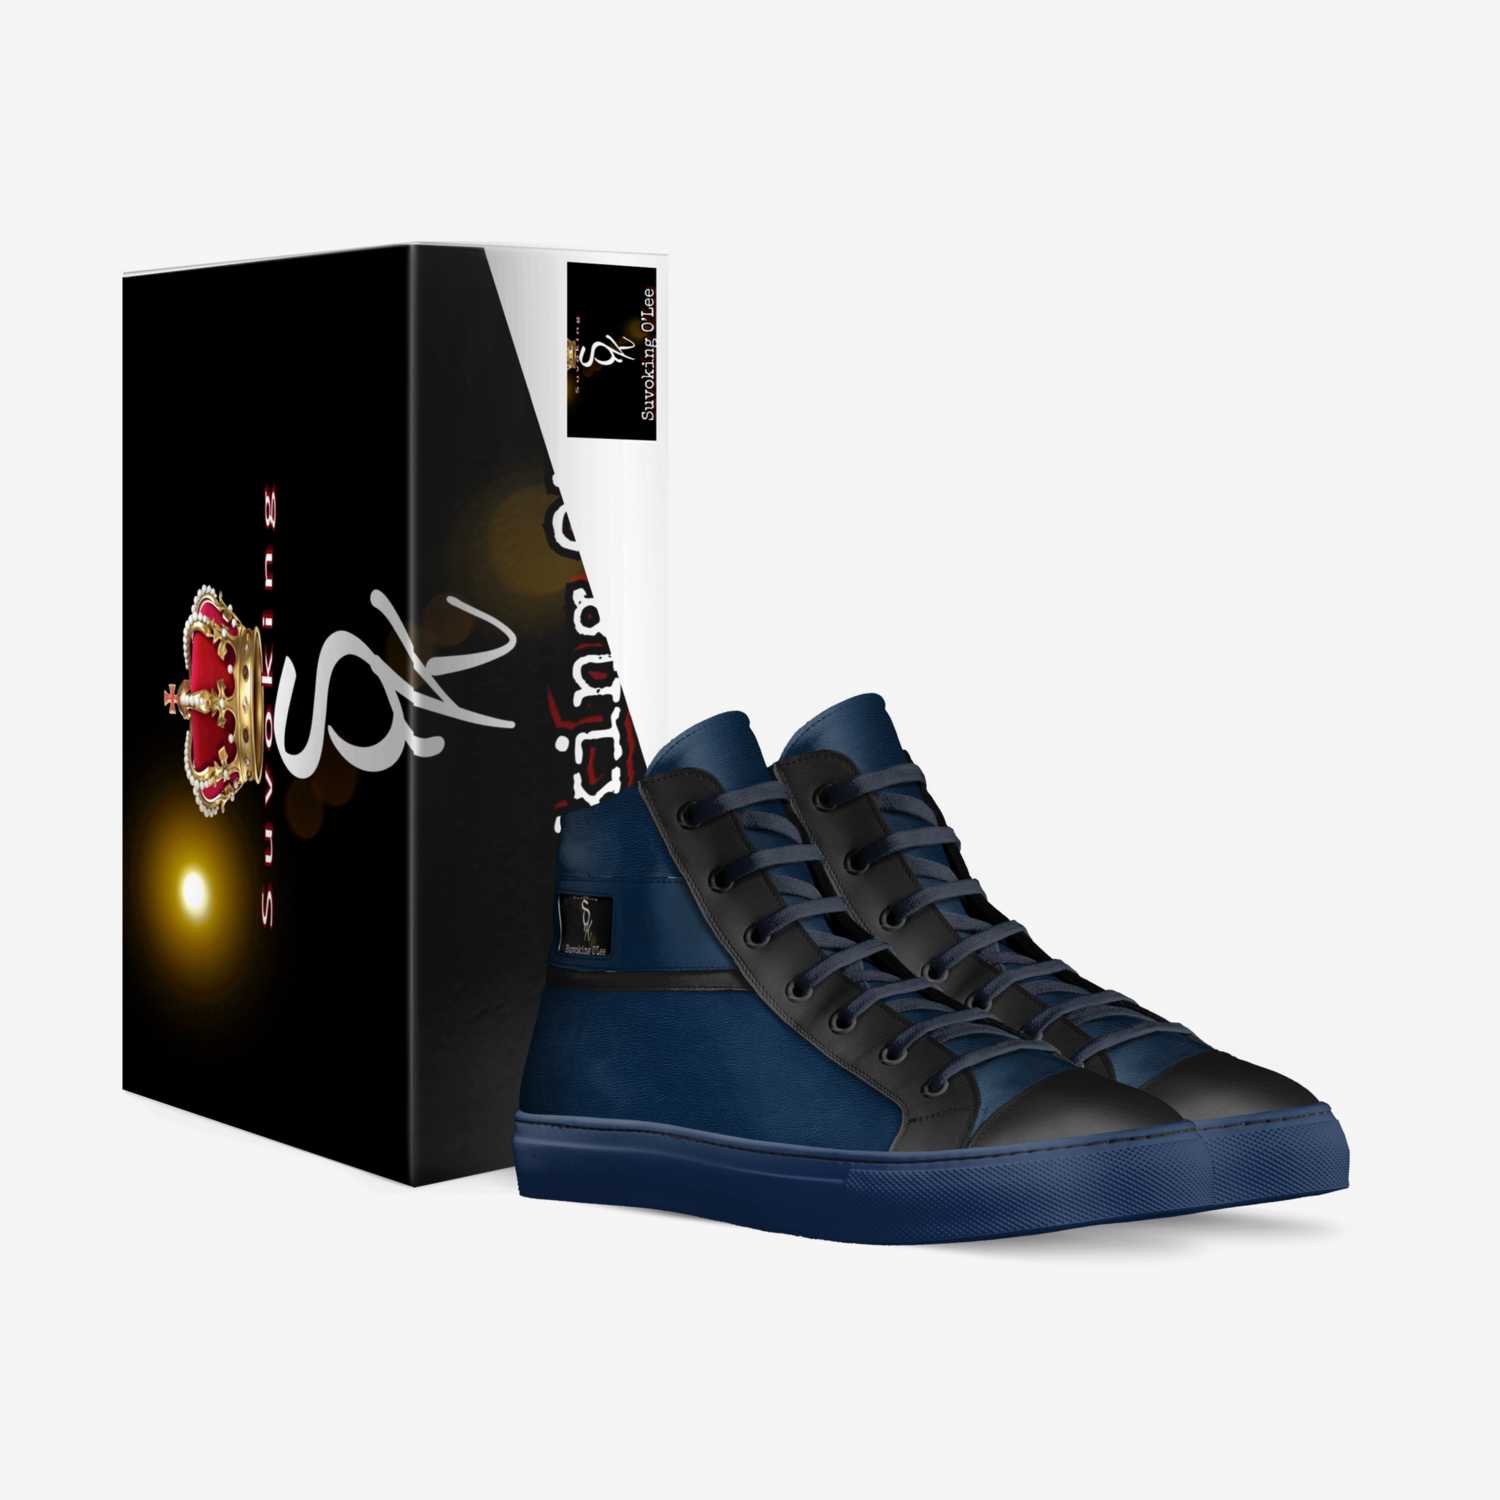 SuvoKingz Royal custom made in Italy shoes by Wilbert White | Box view